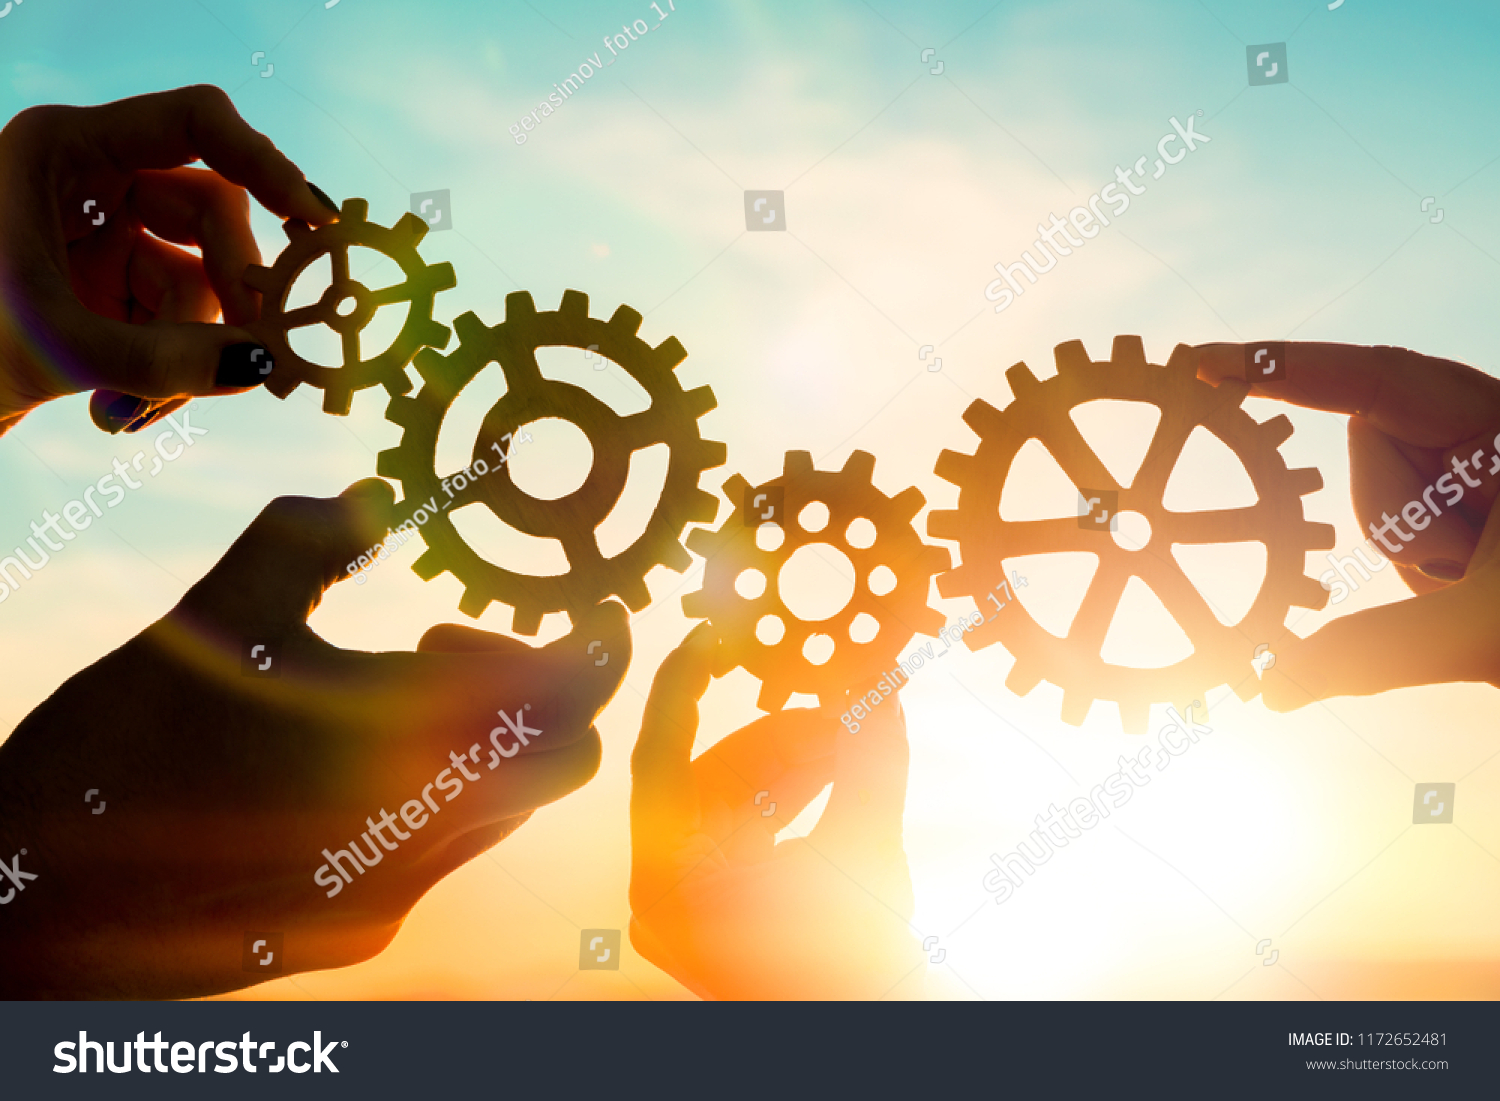 Four hands of businessmen collect gear from the gears of the details of puzzles. against the sunset. The concept of a business idea. Teamwork, strategy, cooperation, innovation. #1172652481